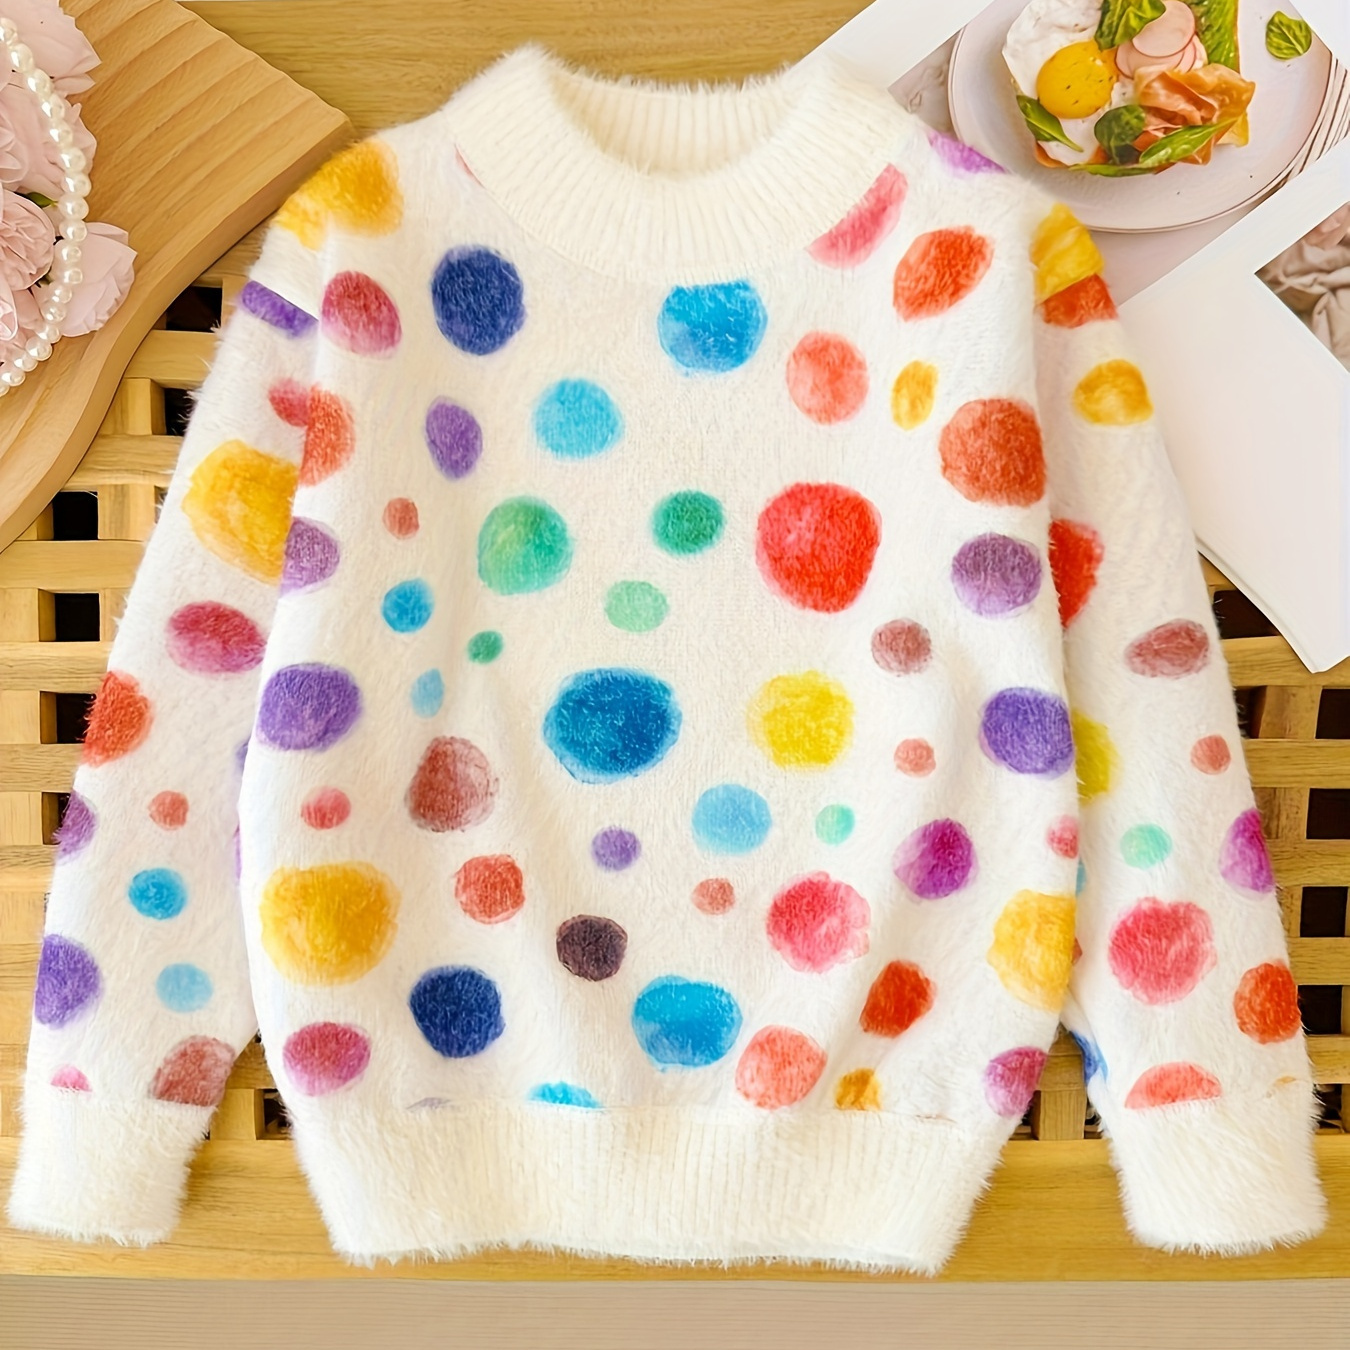 

Girls' Imitation Mink Fleece Colorful Dots Thick Warm Knit Sweater For Kids, Autumn Sweater